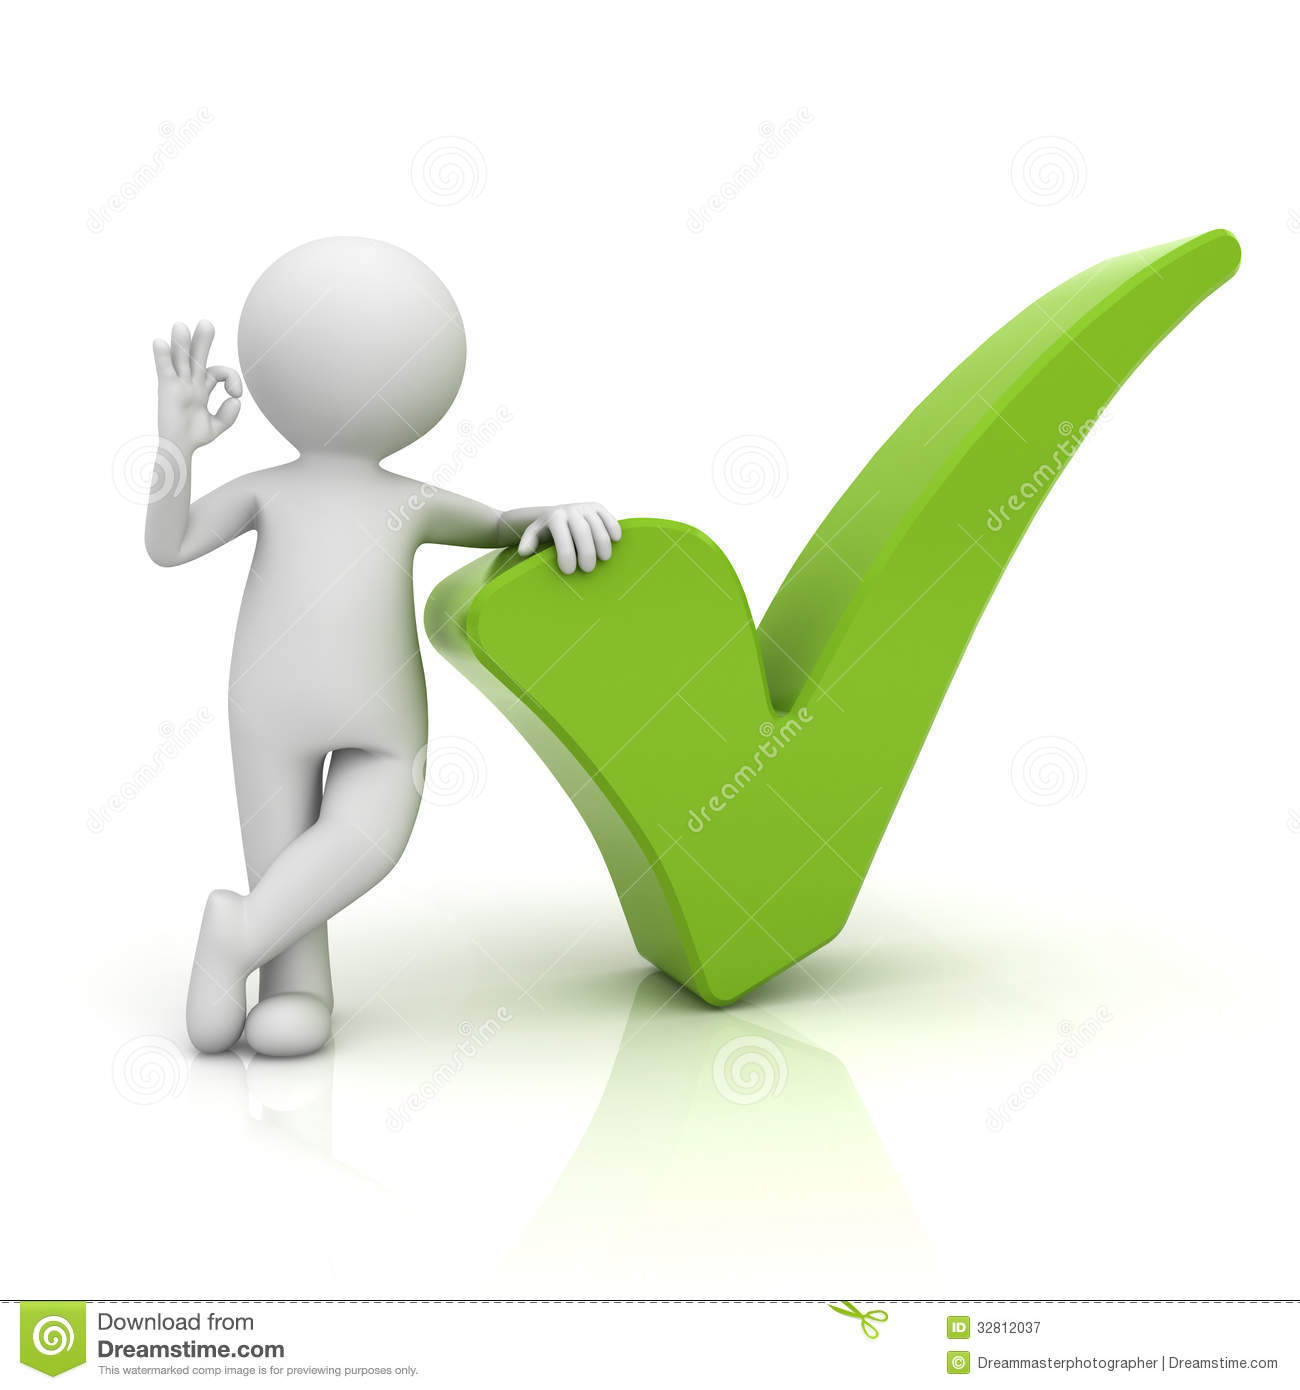     Man Showing Okay Gesture With Green Check Mark Over White Background